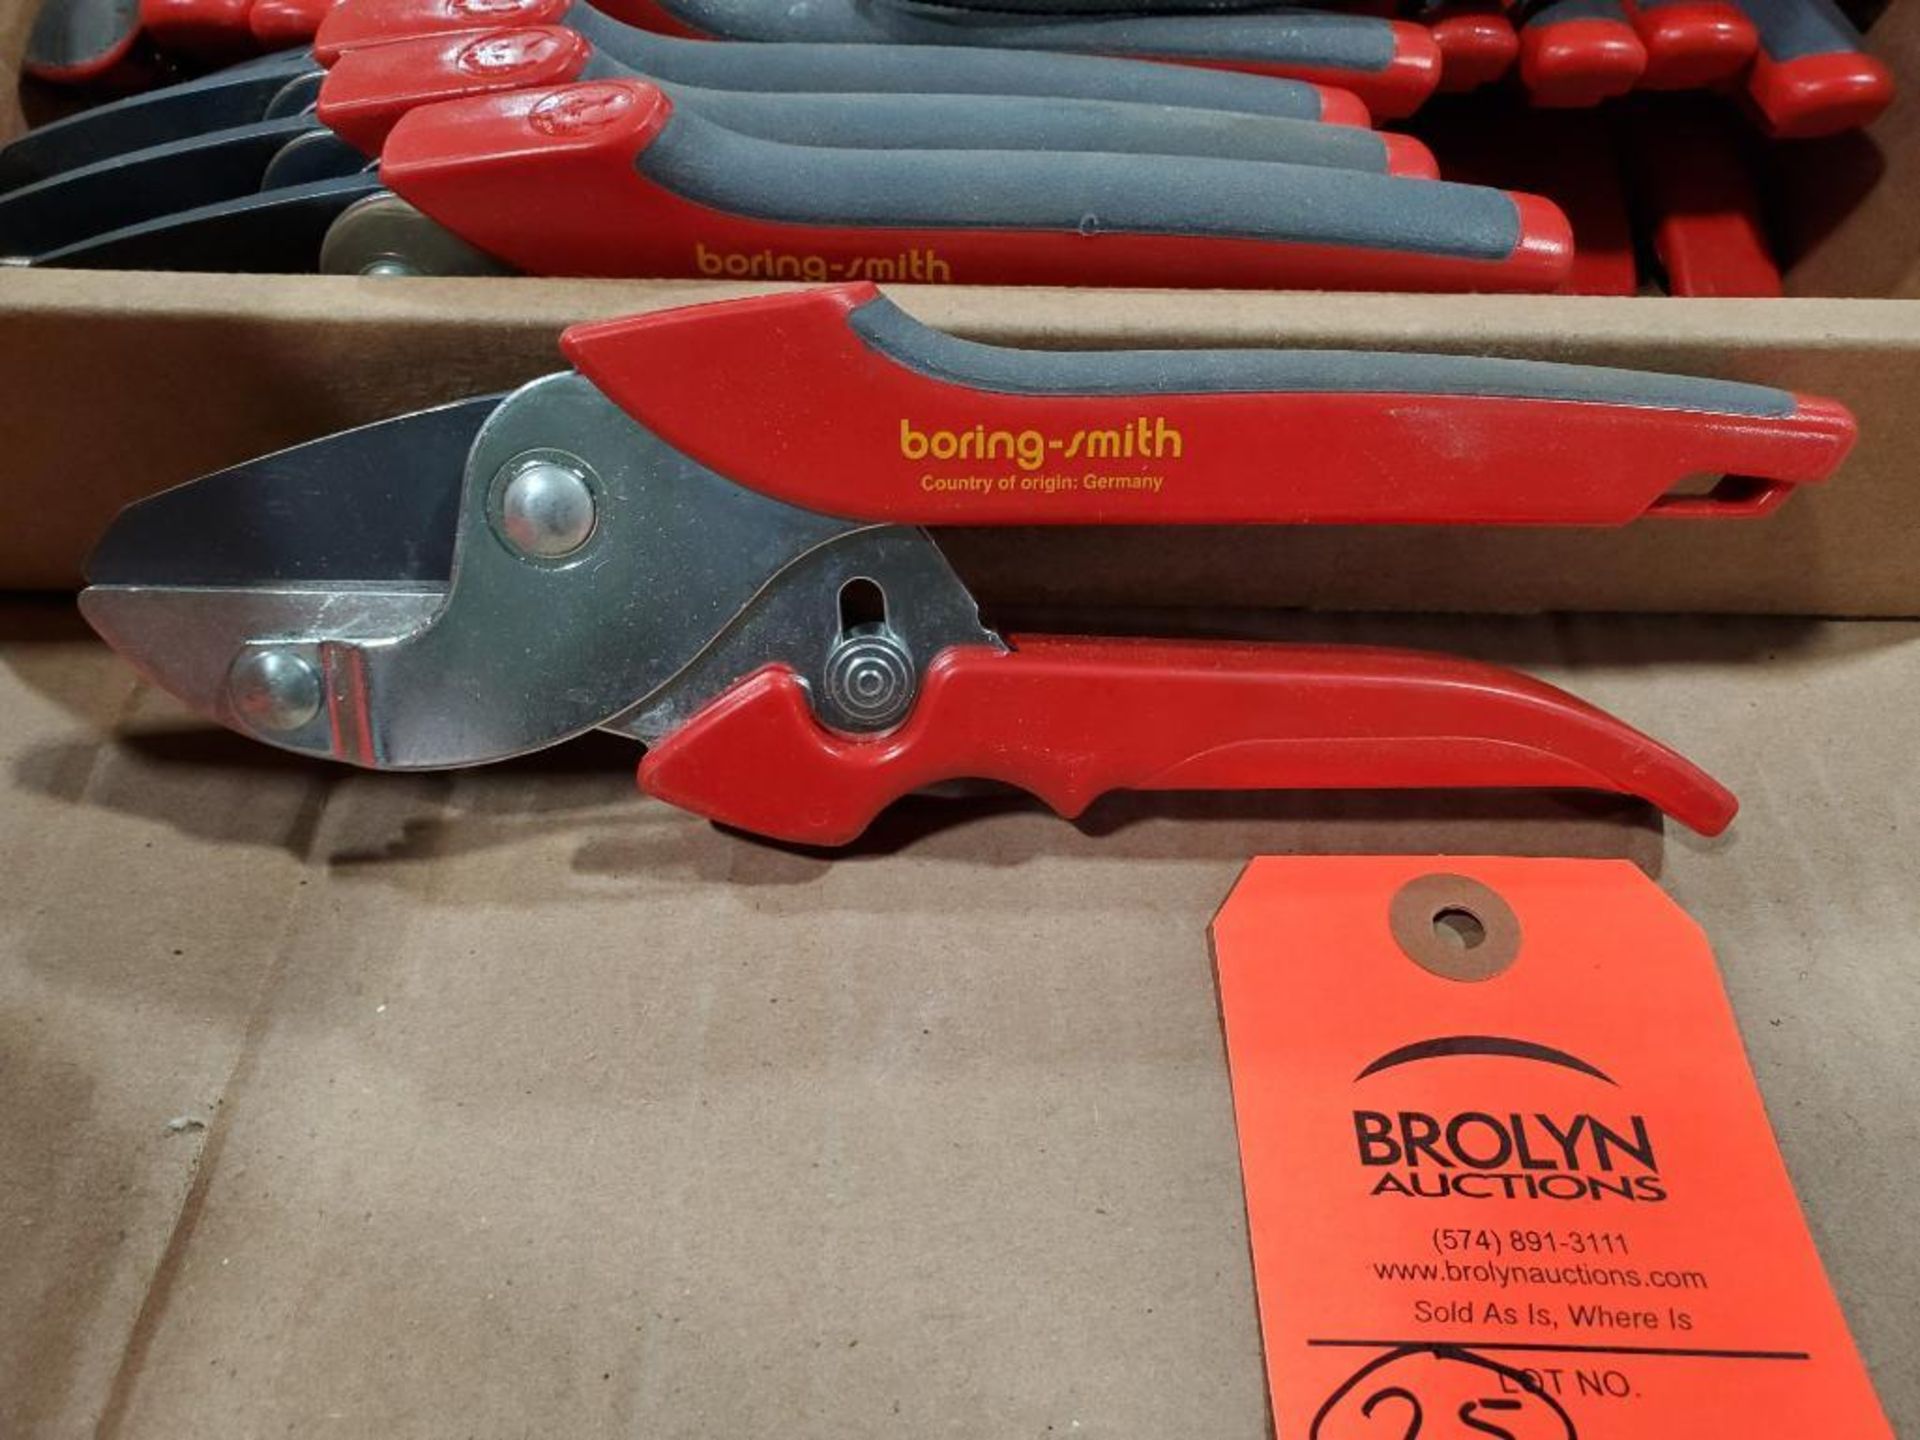 Qty 25 - Boring-Smith anvil pruner cutter. - Image 2 of 3